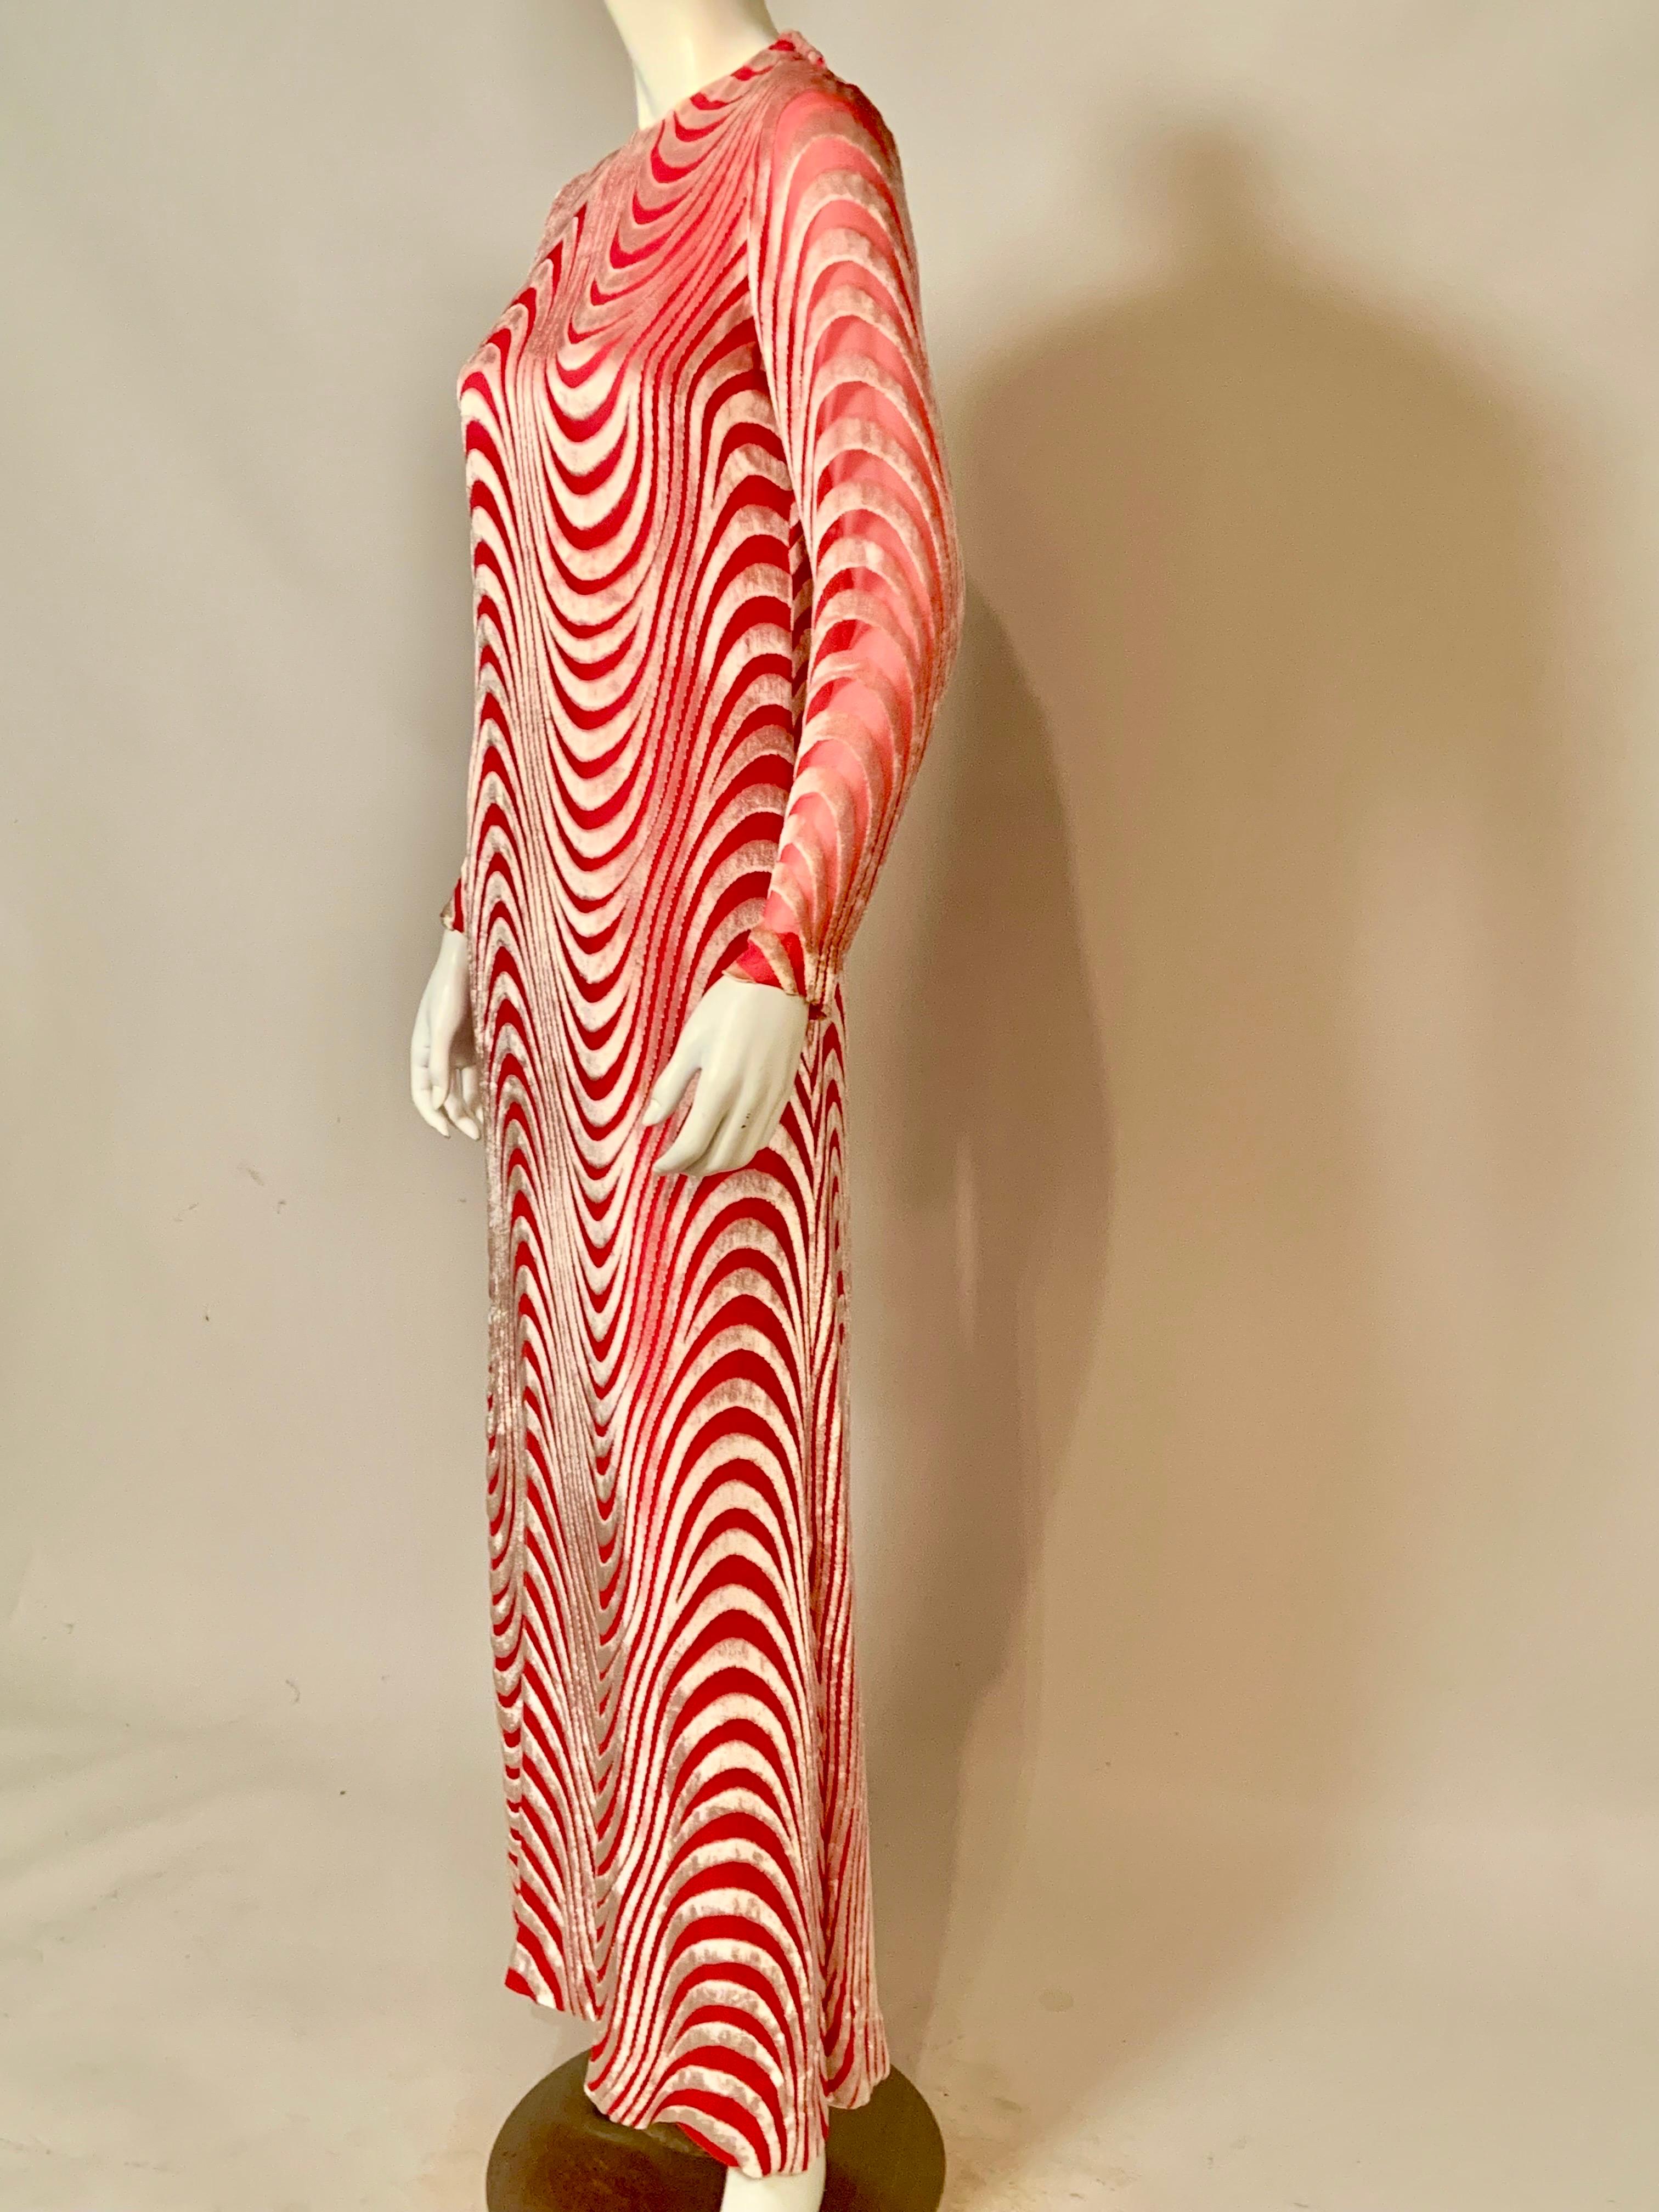 This lovely rose pink silk chiffon dress with undulating white devore velvet was designed in Paris in the 1970's by Tan Giudicelli and retailed by Giorgio of Beverly Hills.  The dress is composed of 2 layers of silk chiffon with a long matching